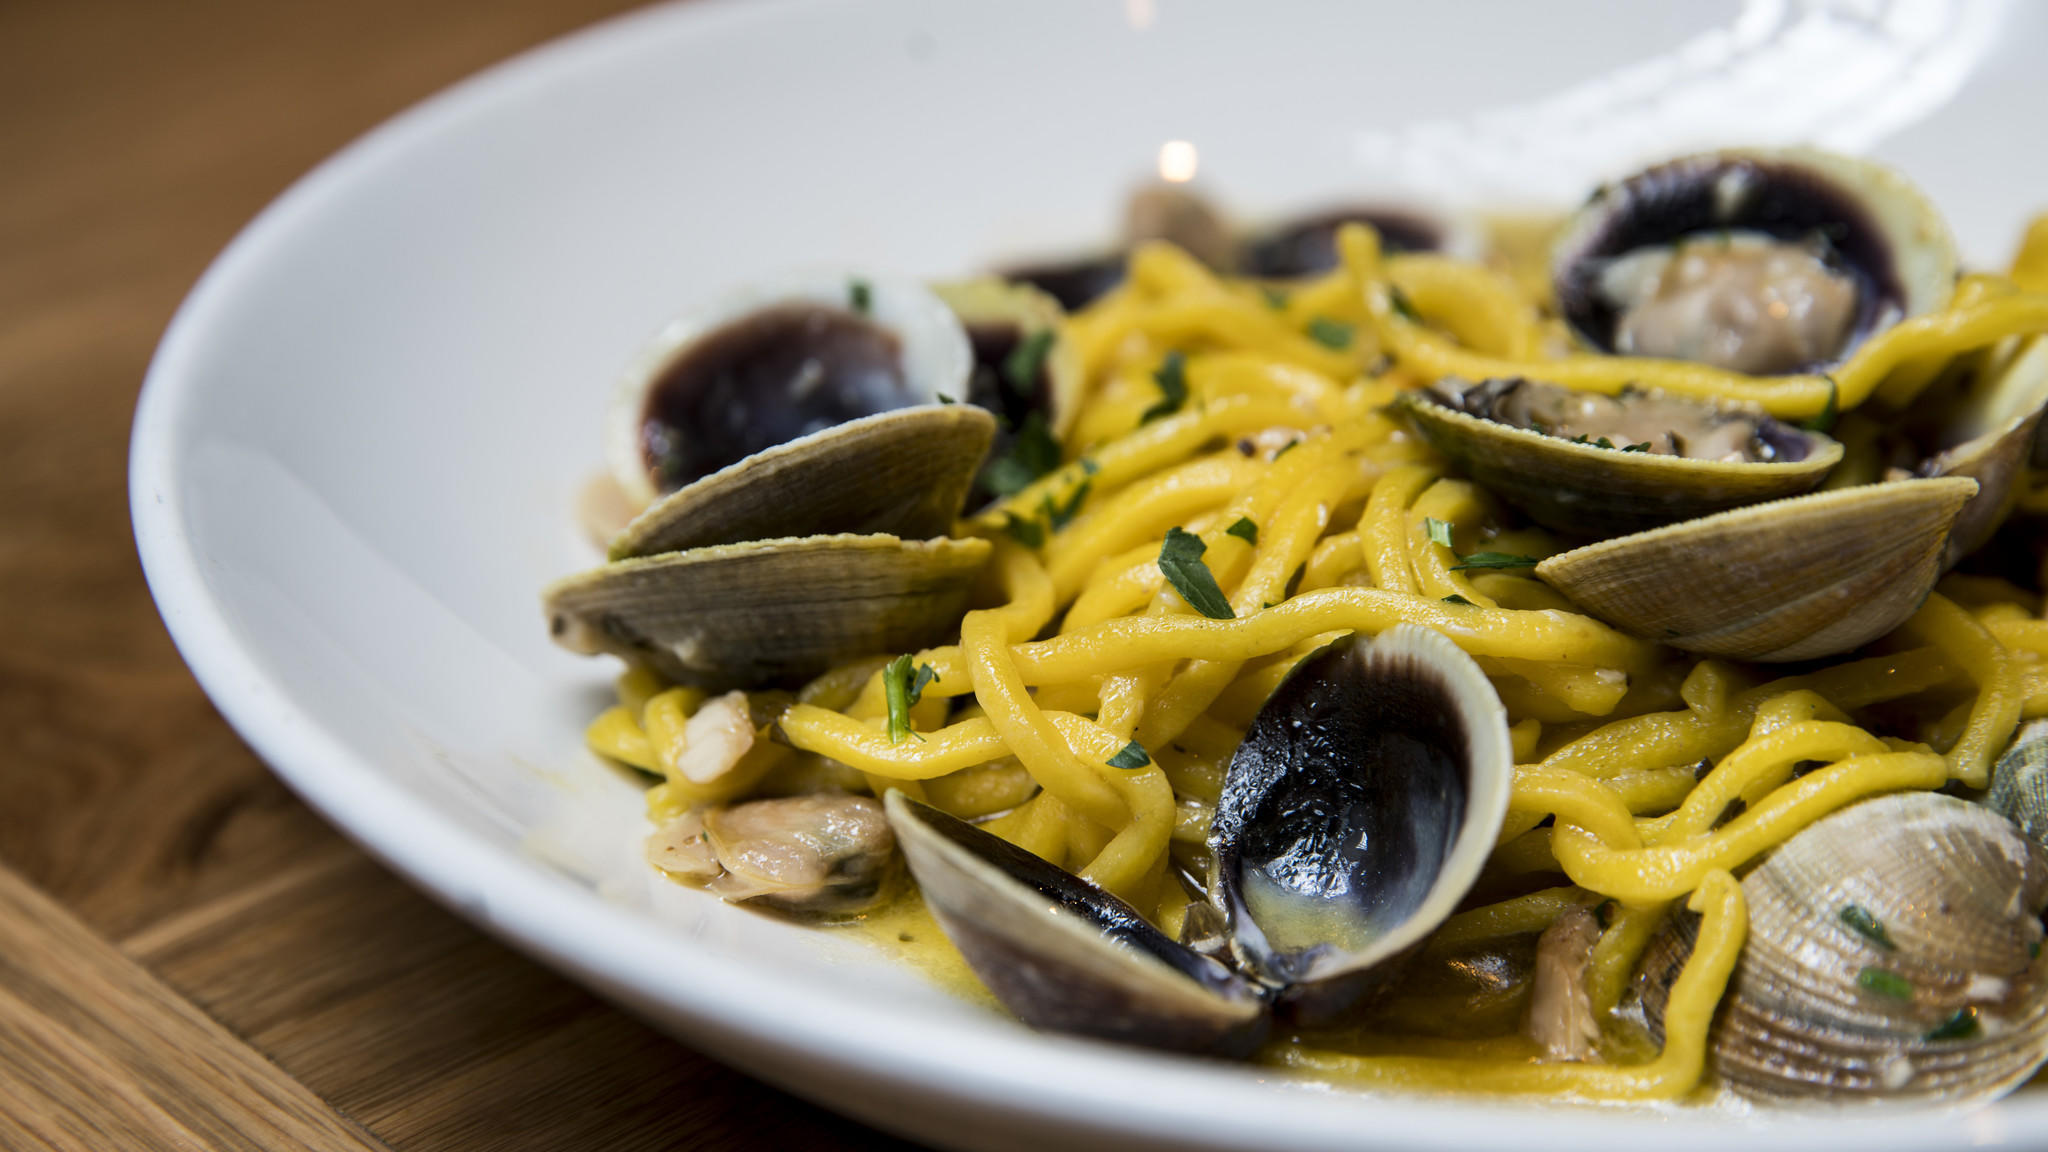 Plate of Uovo's Vongole Tonnarelli, or Tonnarelli pasta with clams